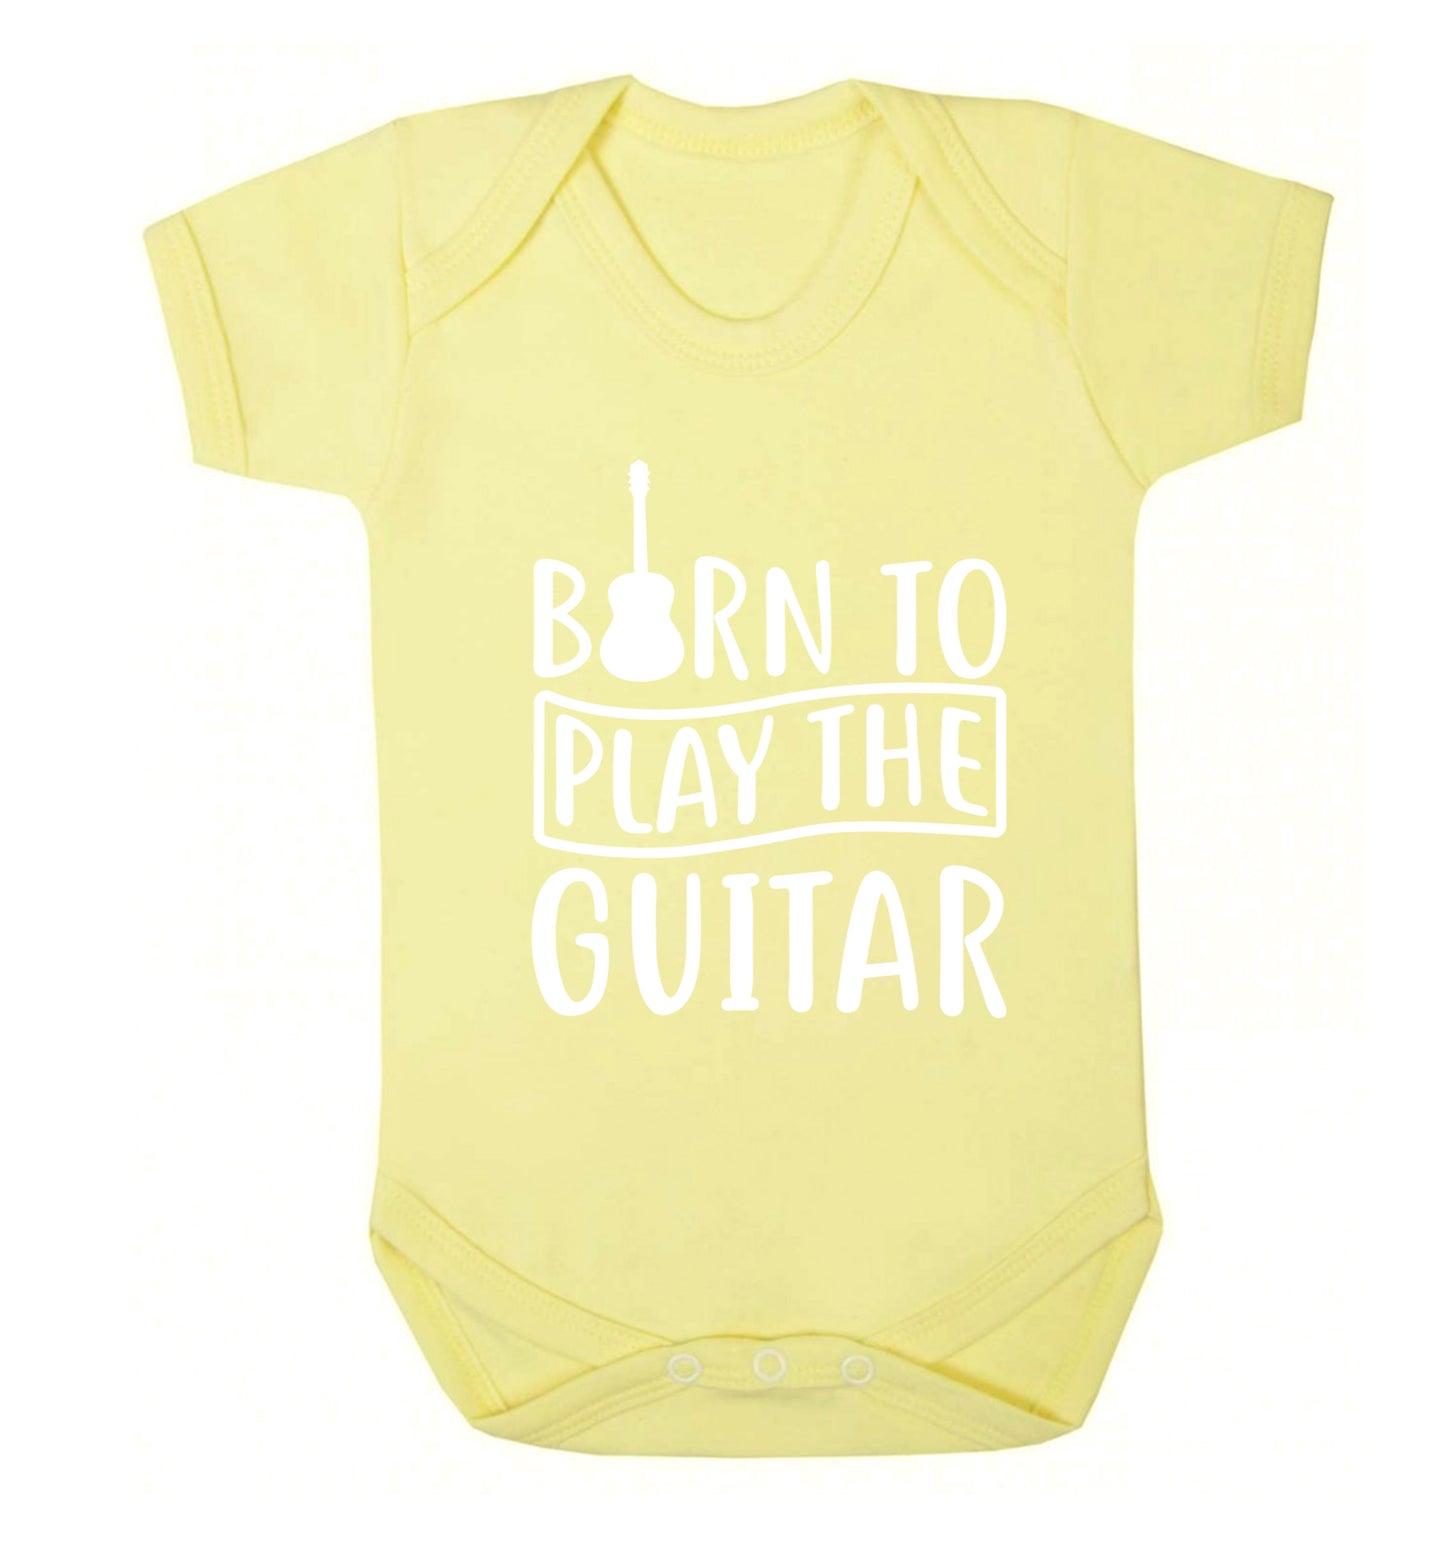 Born to play the guitar Baby Vest pale yellow 18-24 months